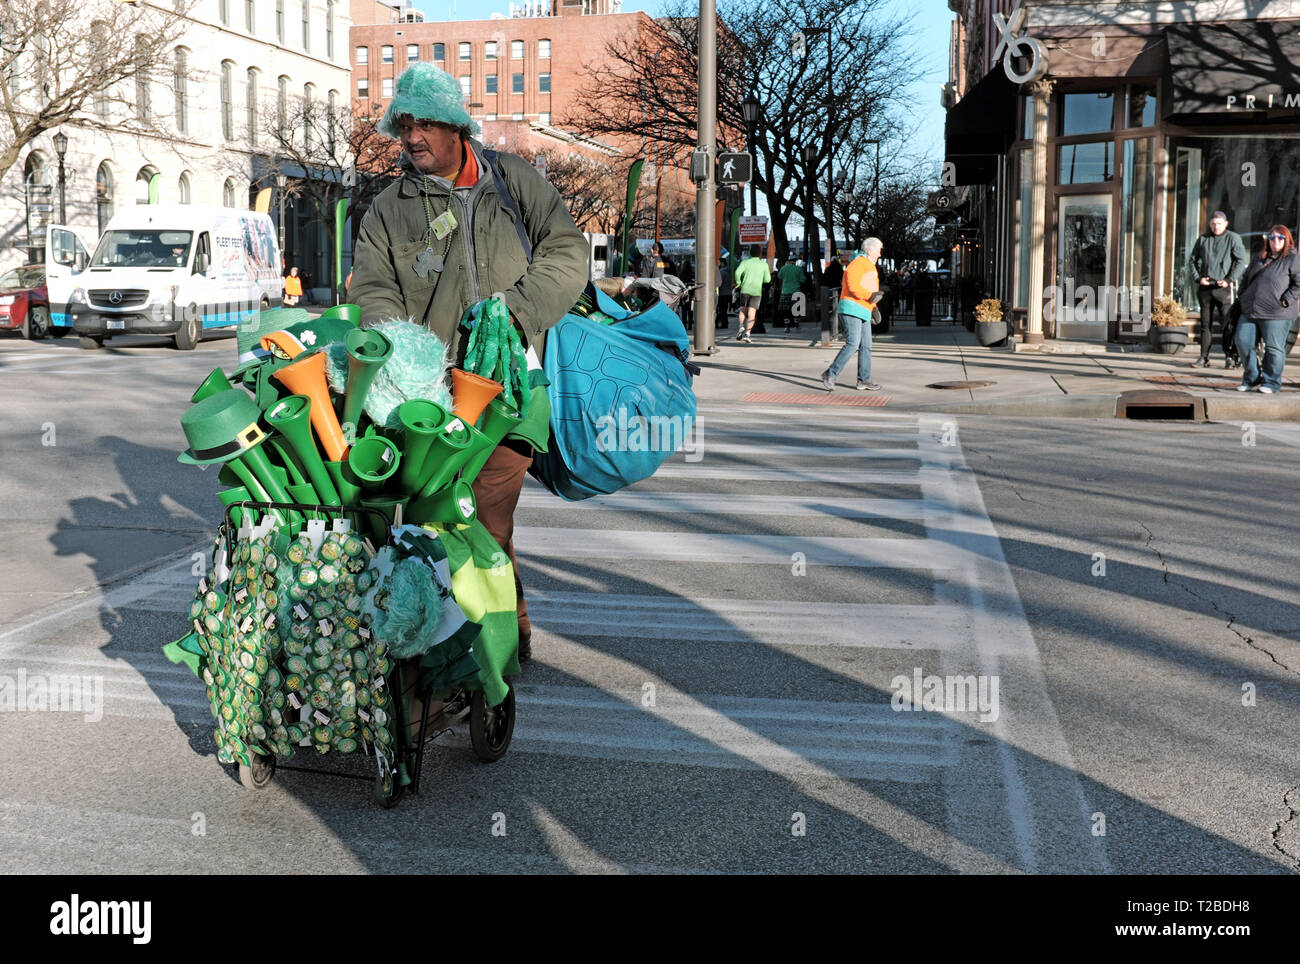 An early morning street merchant carts his 2019 St. Patrick's Day merchandise through downtown Cleveland, Ohio prior to the all day celebration. Stock Photo